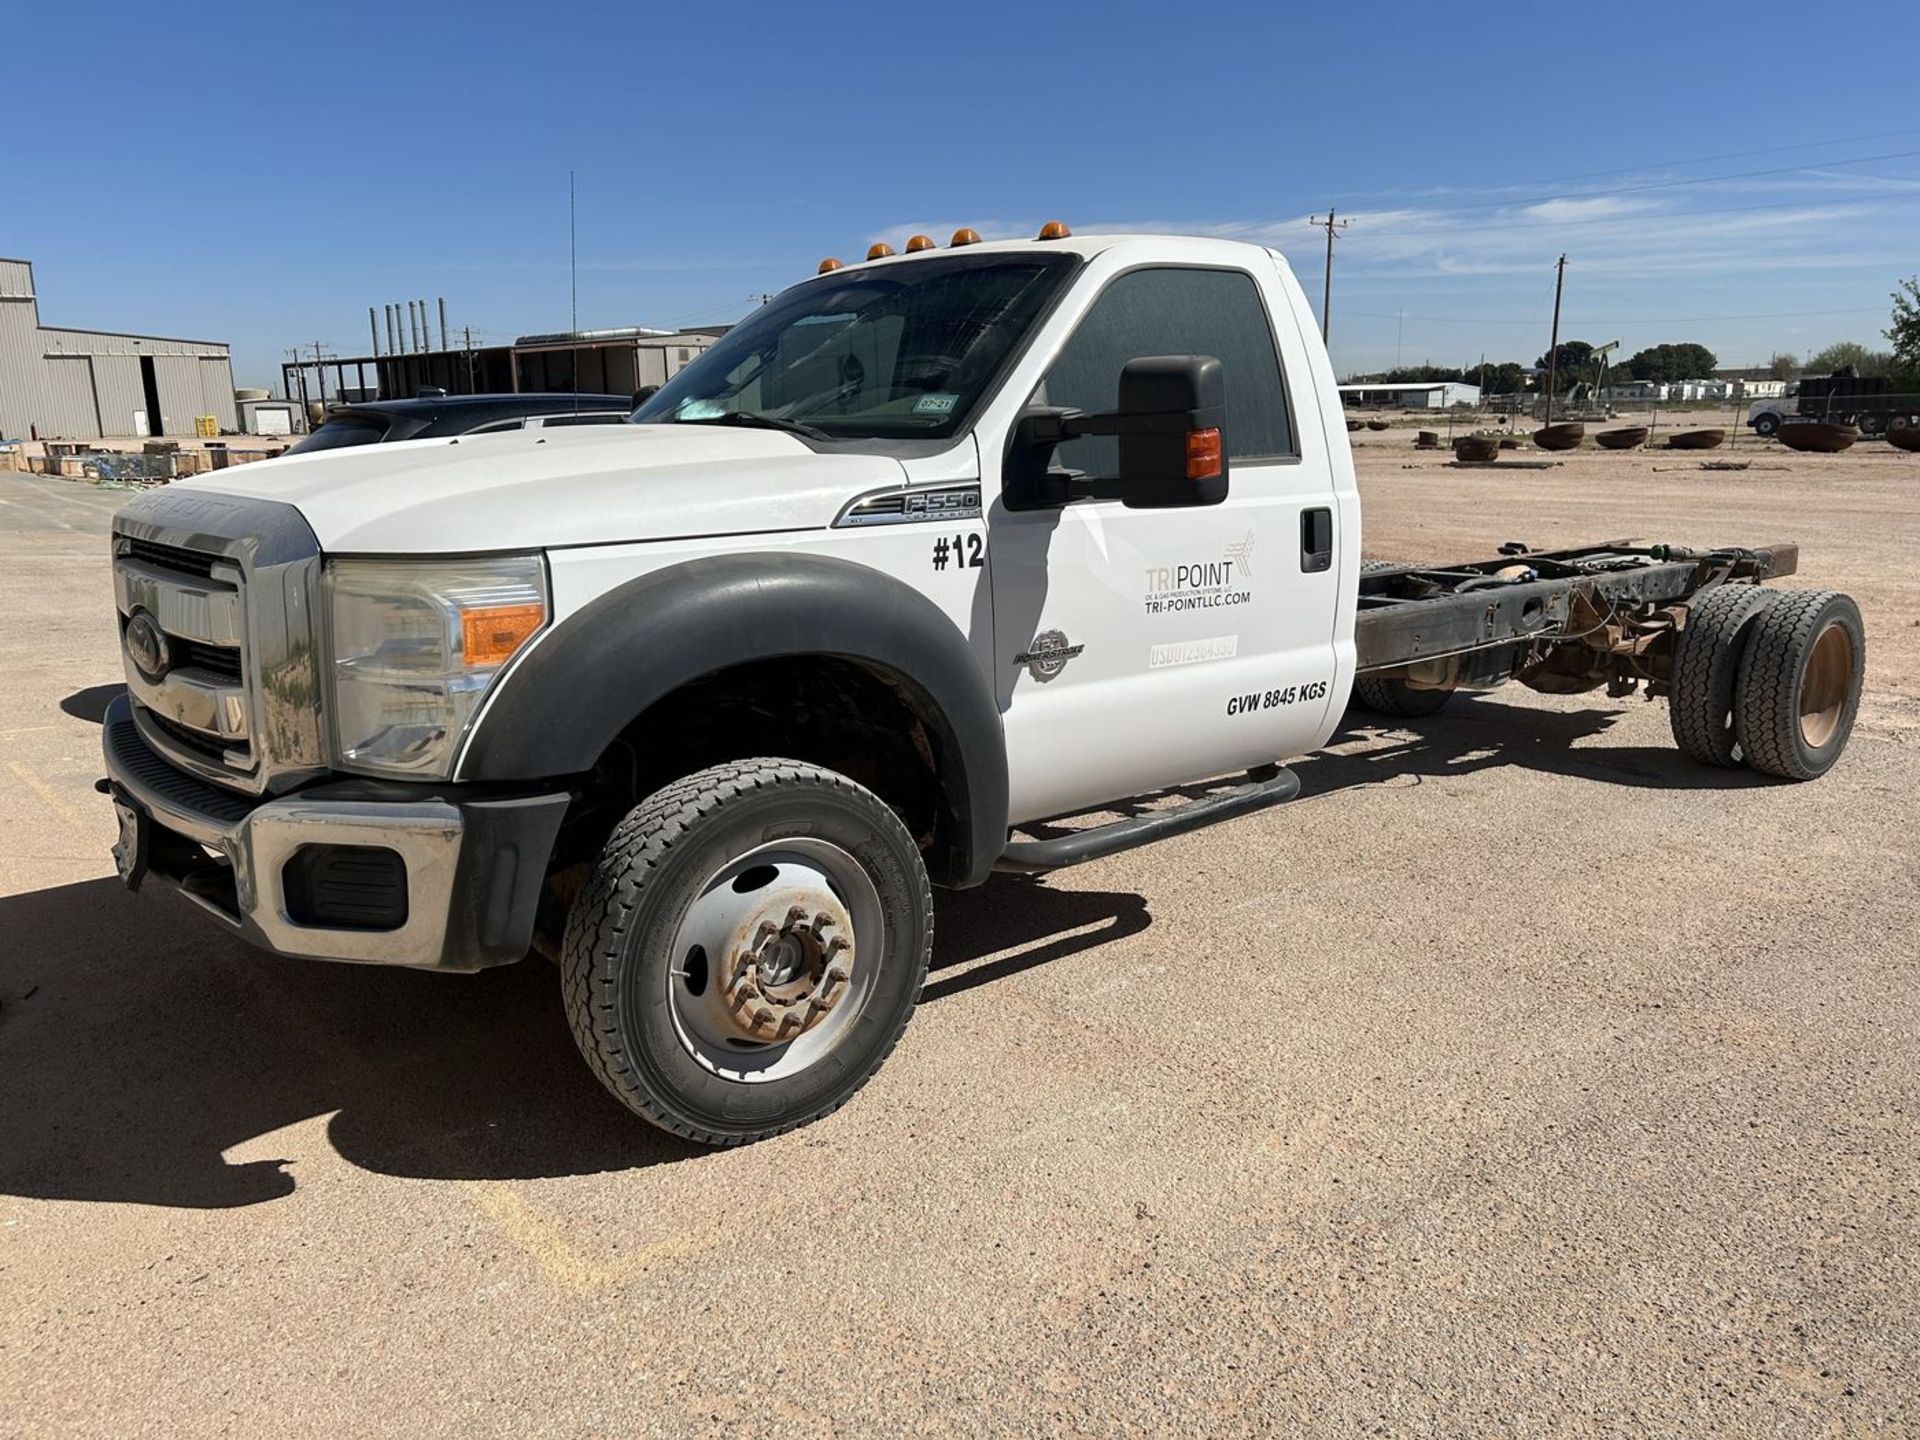 2012 Ford F-550 XLT Super Duty Regular Cab Truck Chassis, VIN: 1FDUF5HT5CEB01856; with 178 in.